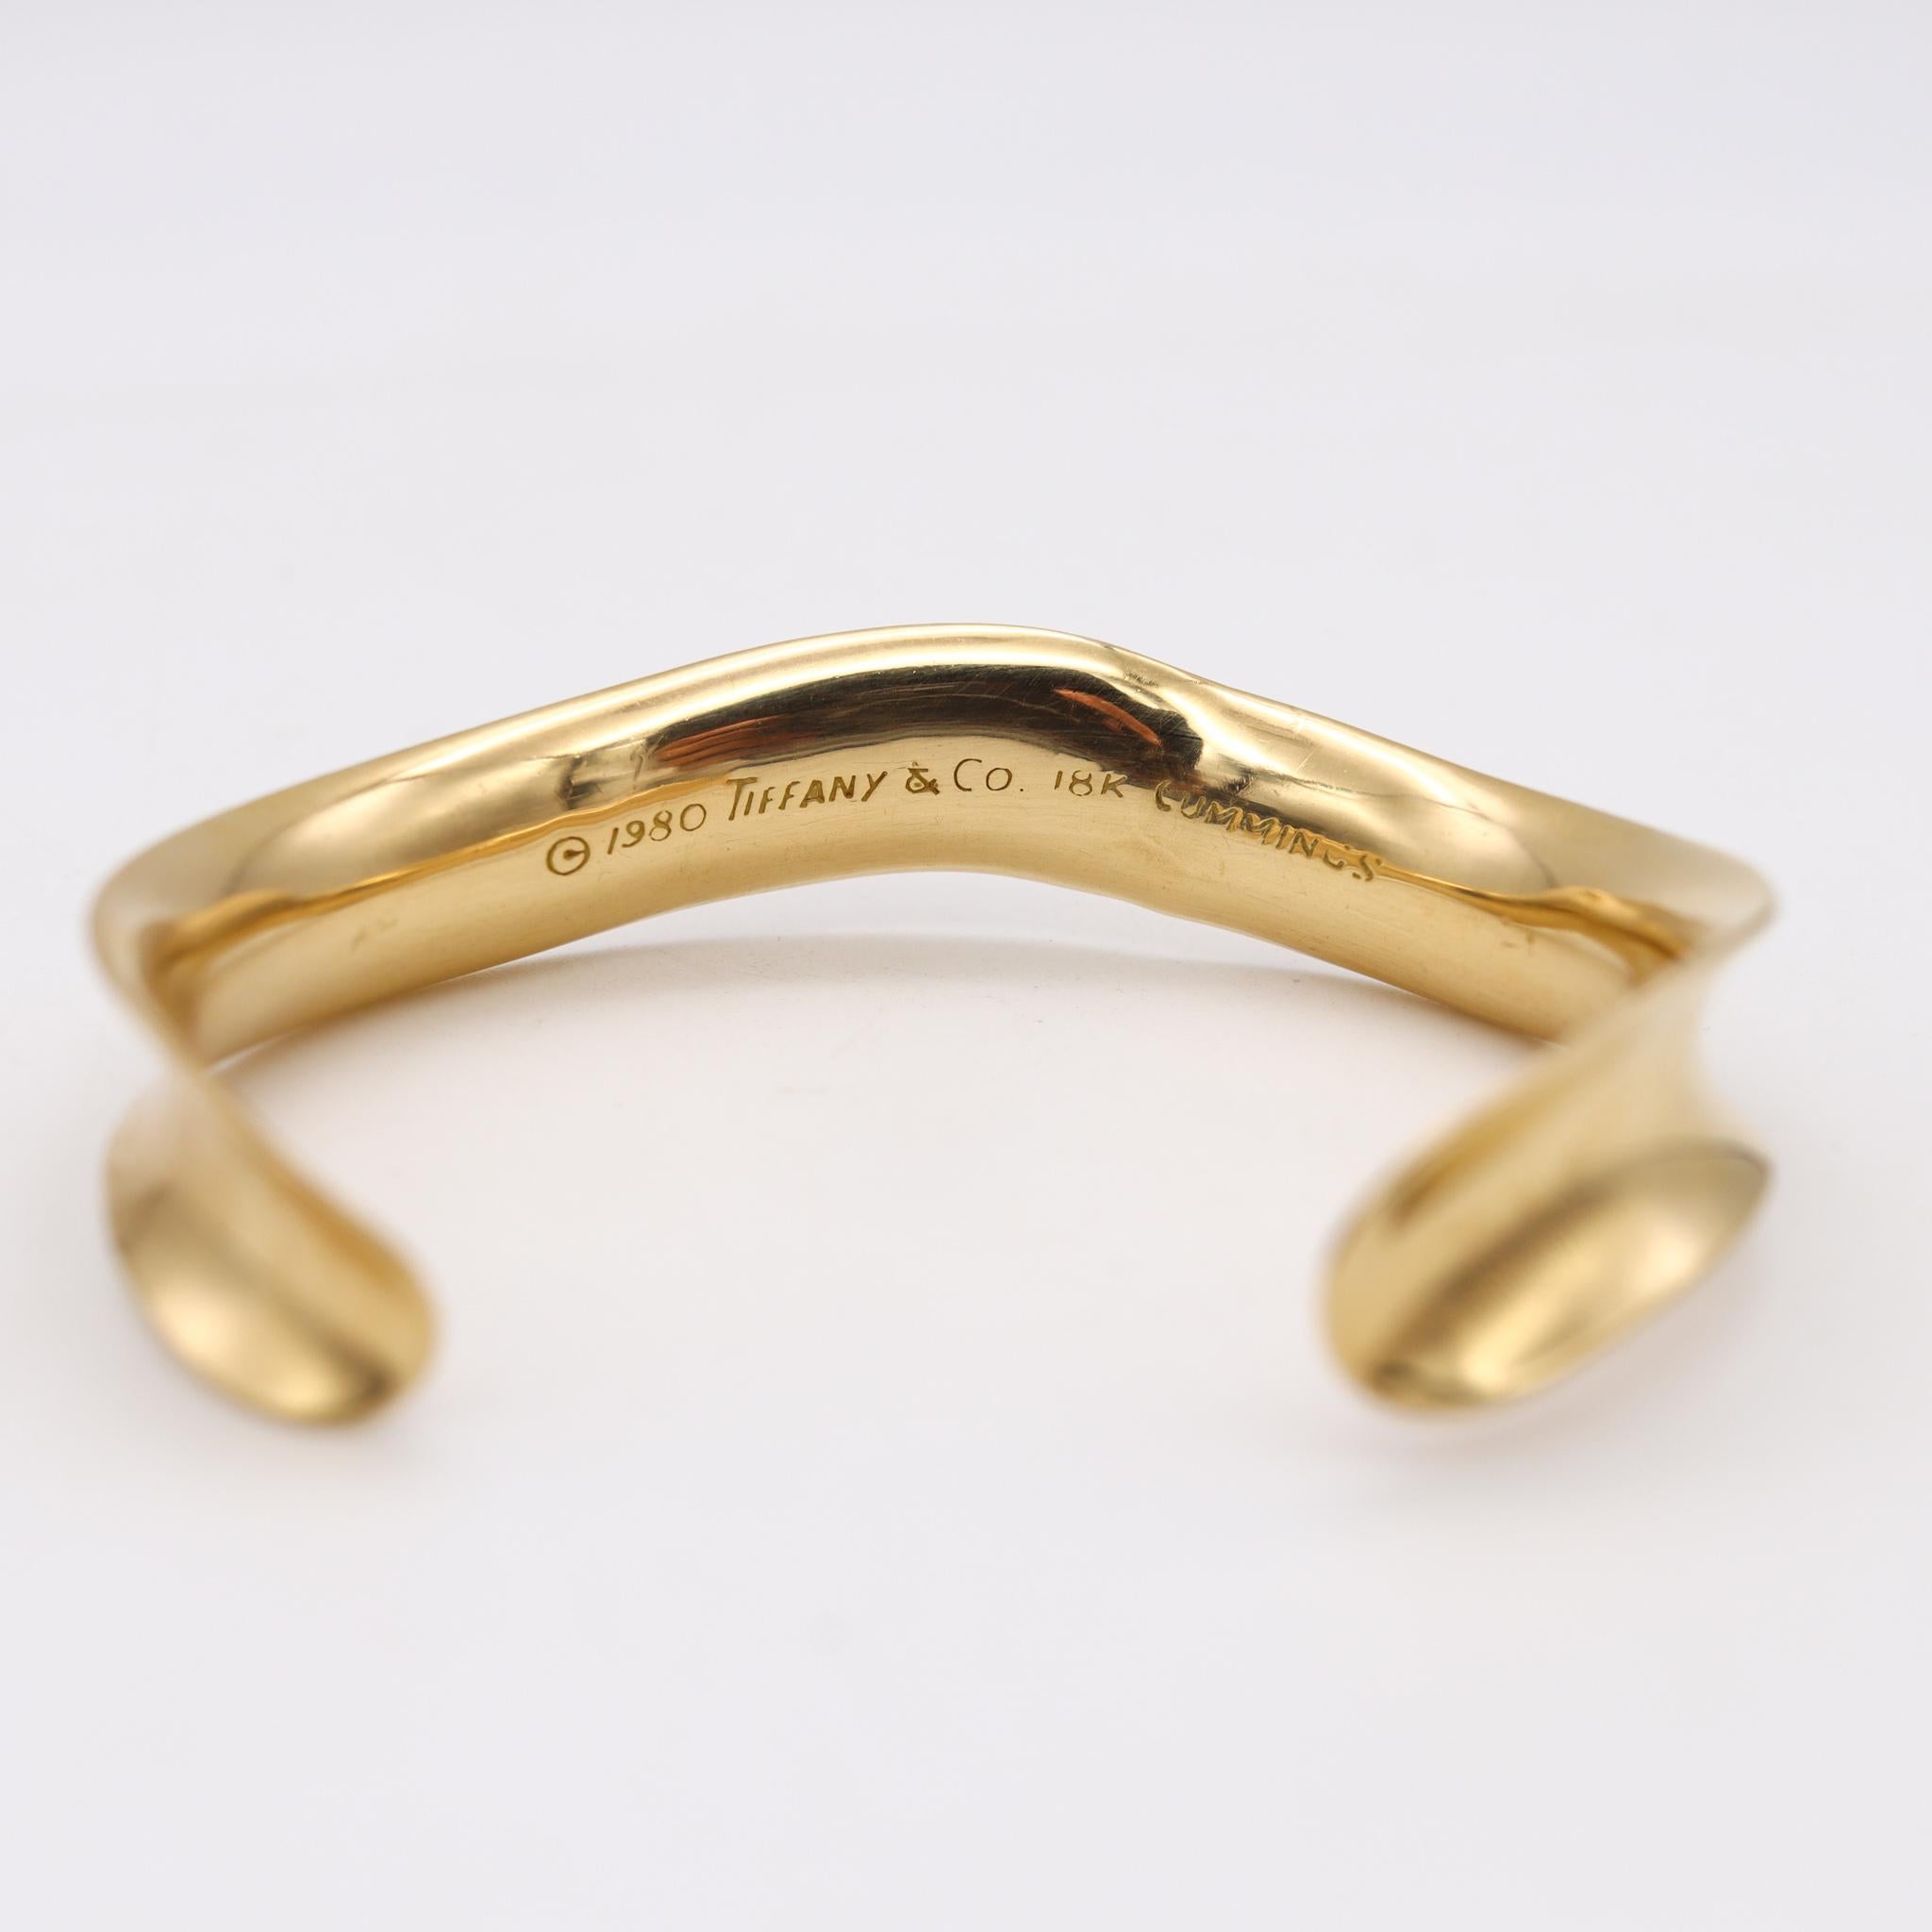 Tiffany Co 1980 by Angela Cummings Wave Cuff Bracelet in Solid 18Kt Yellow Gold 1